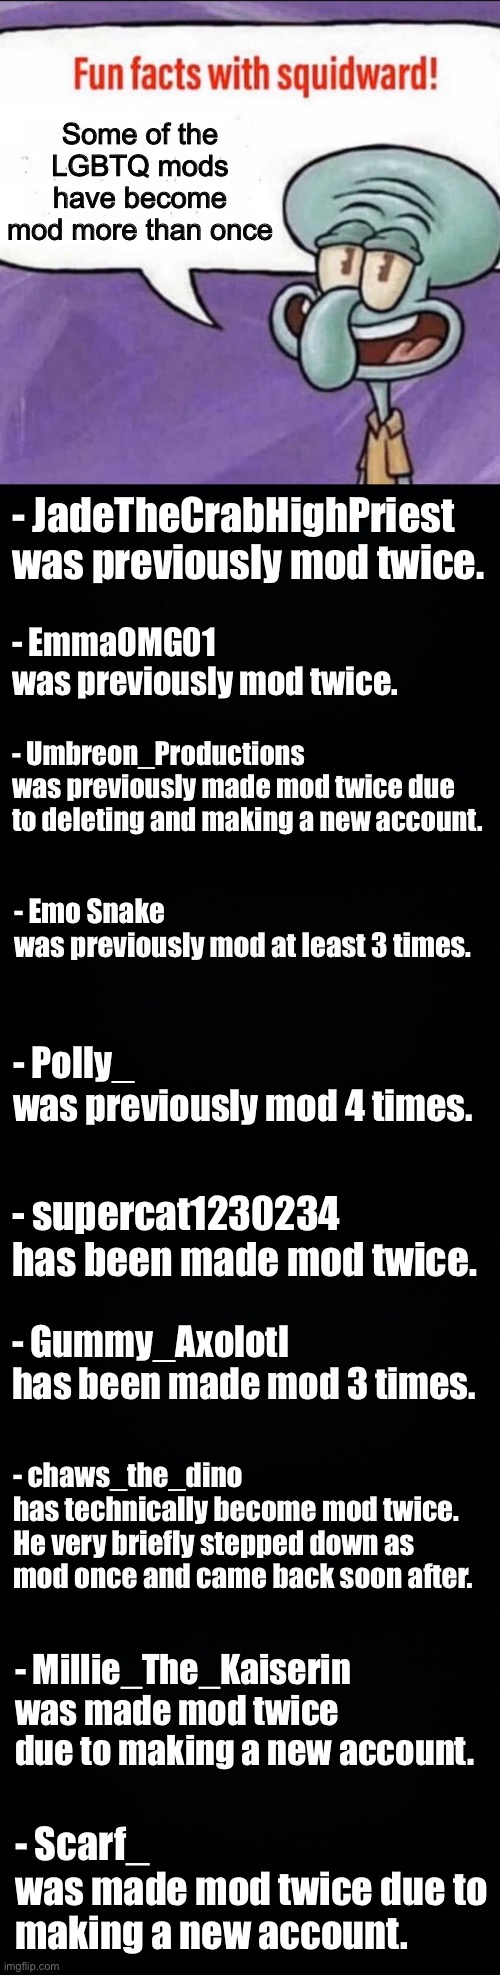 Fun Fact: Some of the LGBTQ mods have become mod more than once | Some of the LGBTQ mods have become mod more than once; - JadeTheCrabHighPriest 
was previously mod twice. - EmmaOMG01 
was previously mod twice. - Umbreon_Productions 
was previously made mod twice due to deleting and making a new account. - Emo Snake 
was previously mod at least 3 times. - Polly_ 
was previously mod 4 times. - supercat1230234 
has been made mod twice. - Gummy_Axolotl 
has been made mod 3 times. - chaws_the_dino 
has technically become mod twice. 
He very briefly stepped down as mod once and came back soon after. - Millie_The_Kaiserin 
was made mod twice due to making a new account. - Scarf_
was made mod twice due to making a new account. | image tagged in fun facts with squidward,fun fact,lgbtq,mods,imgflip mods,trivia | made w/ Imgflip meme maker